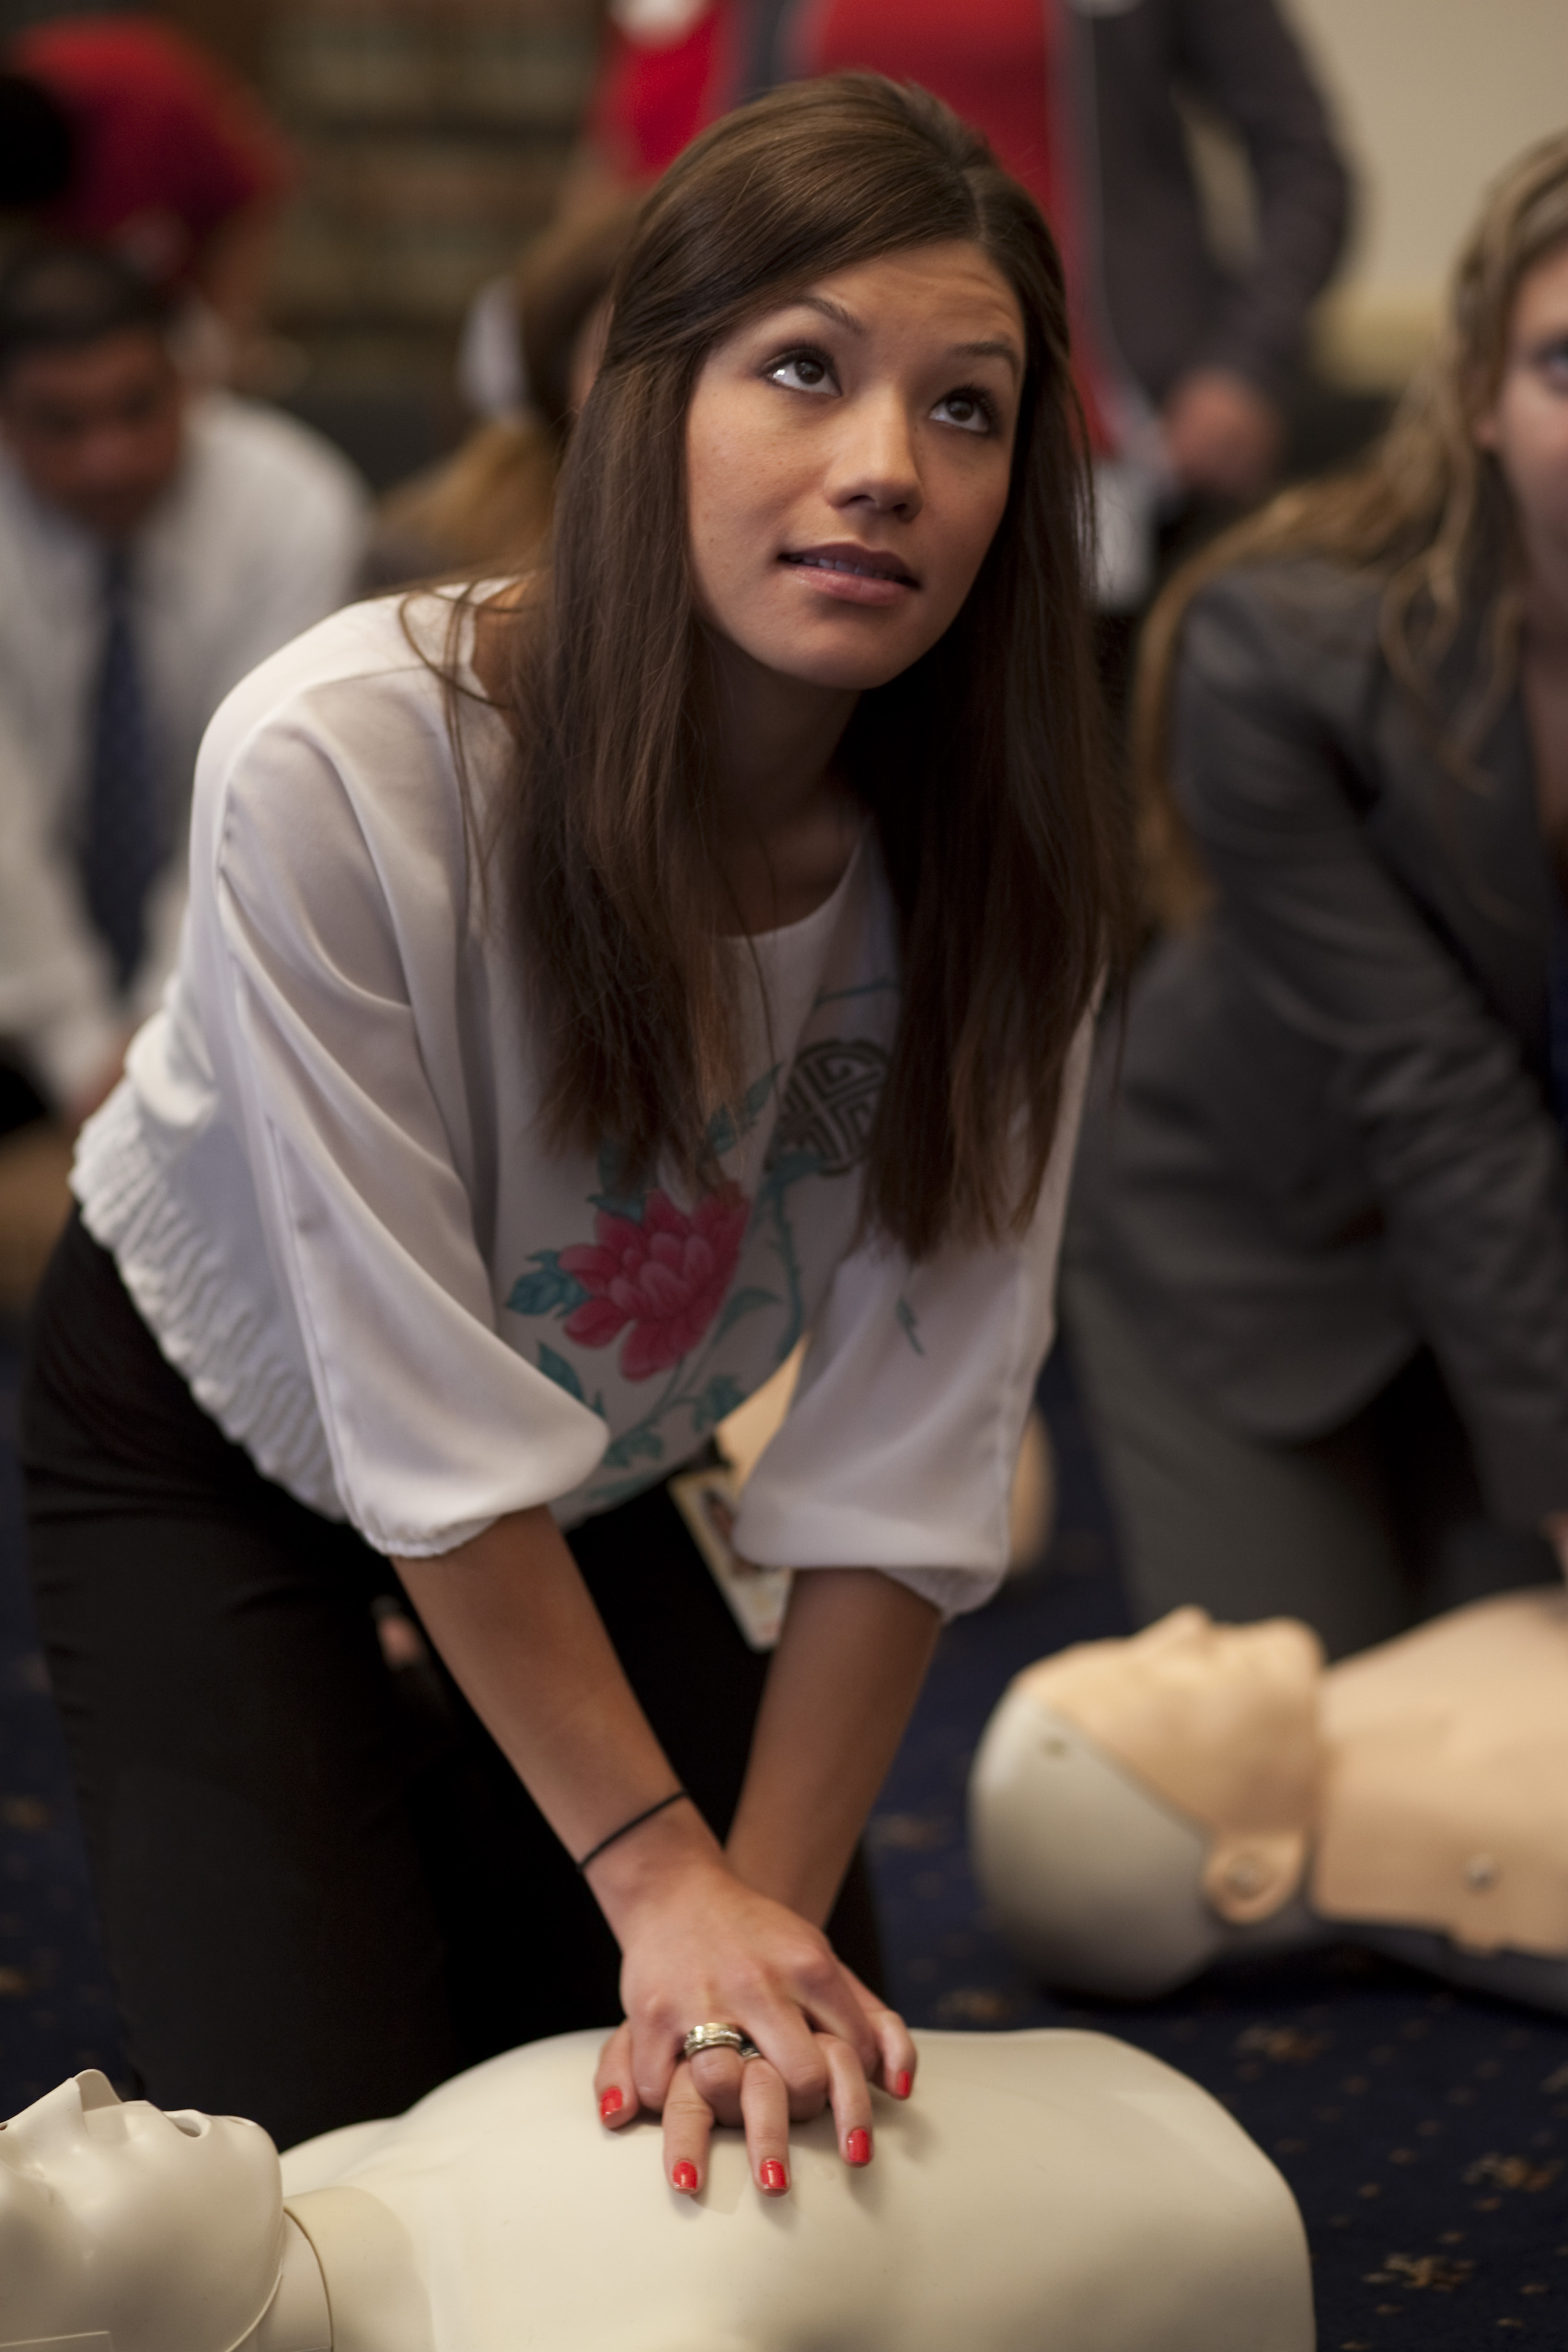 Learning handsonly CPR can help save a life red cross chat